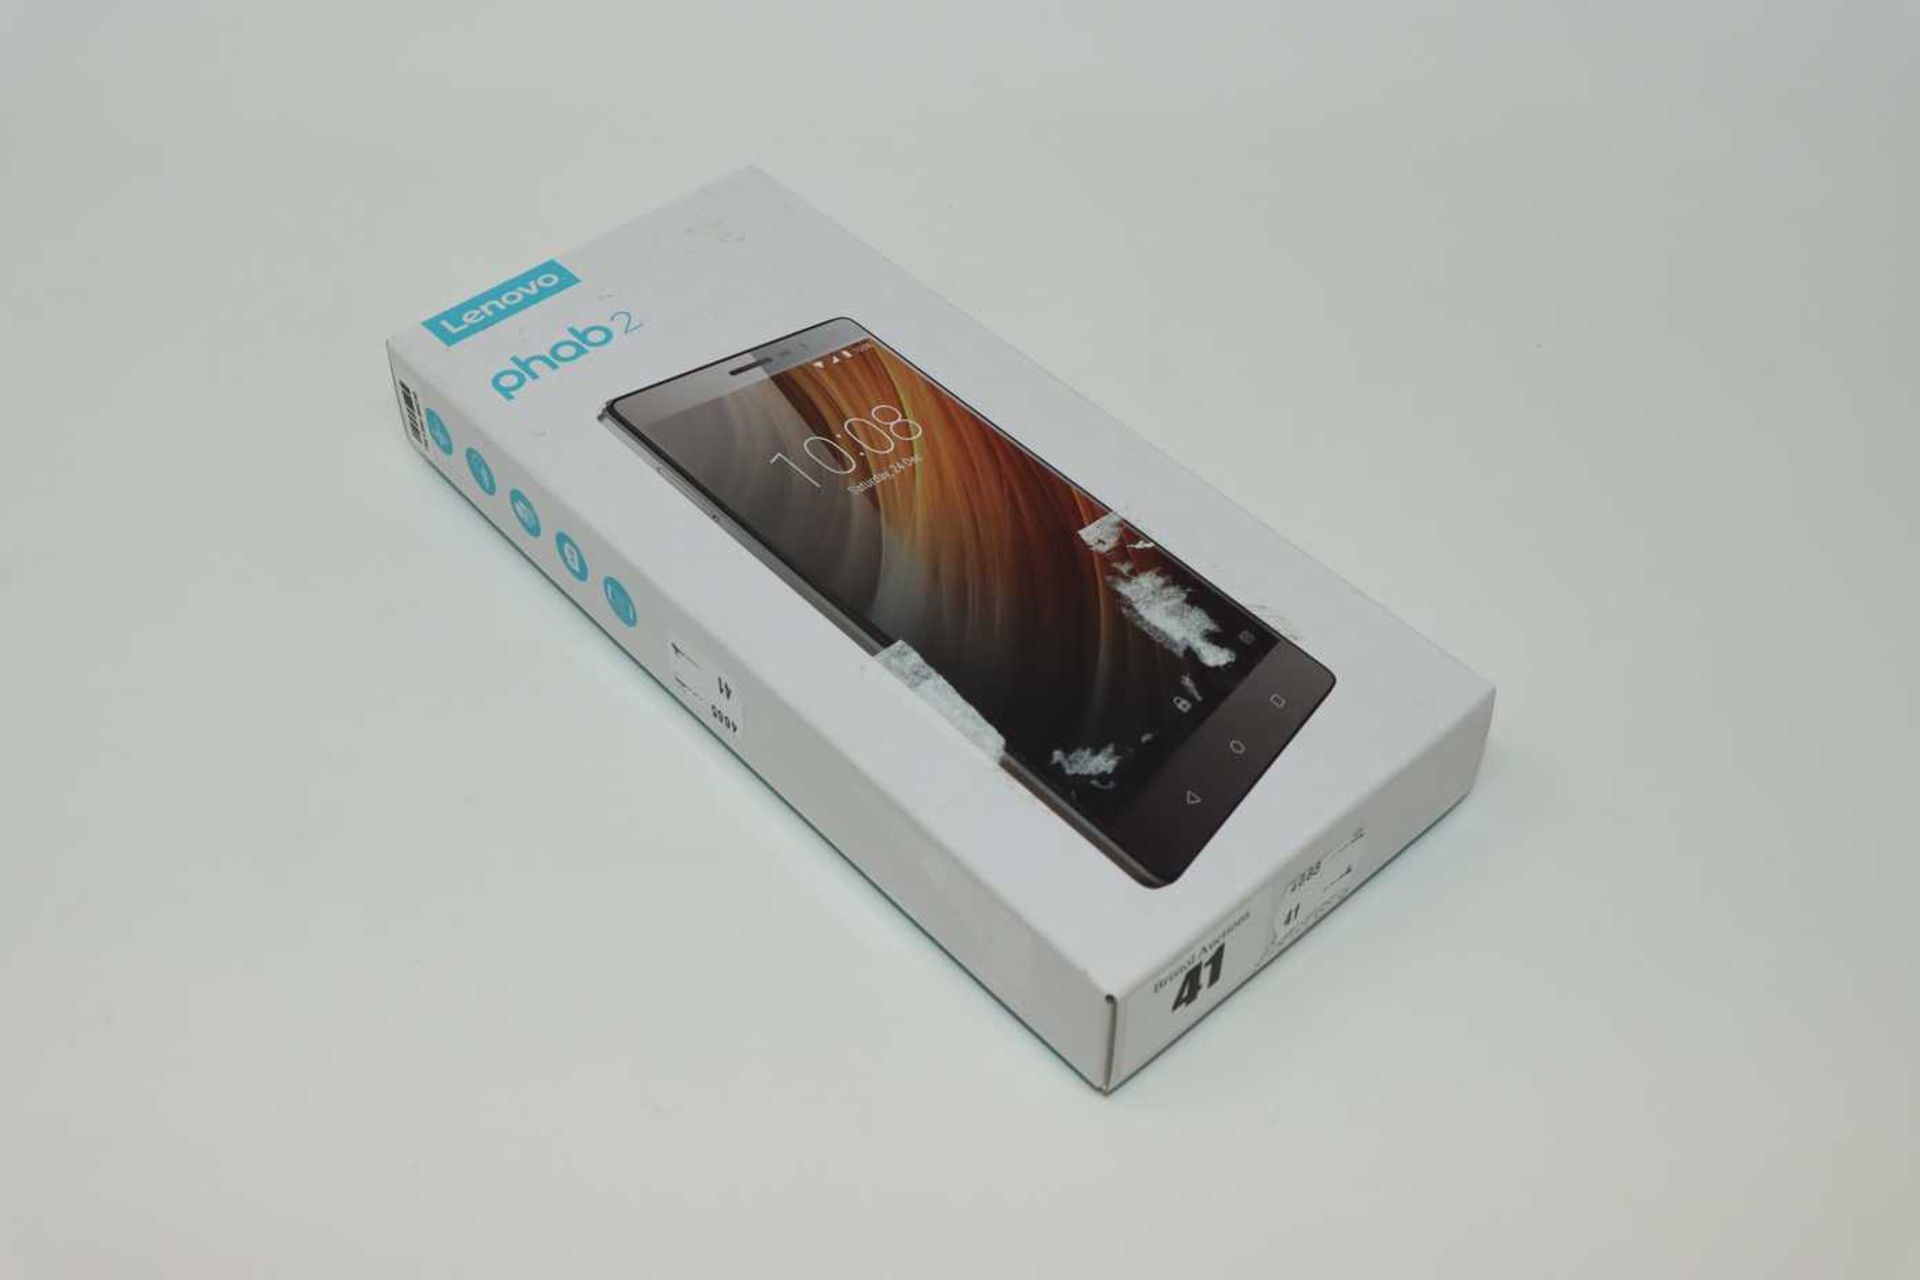 A pre-owned Lenovo PHAB 2 32GB 6.4" Smartphone in Gunmetal Grey (Unlocked, Boxed, No Charger